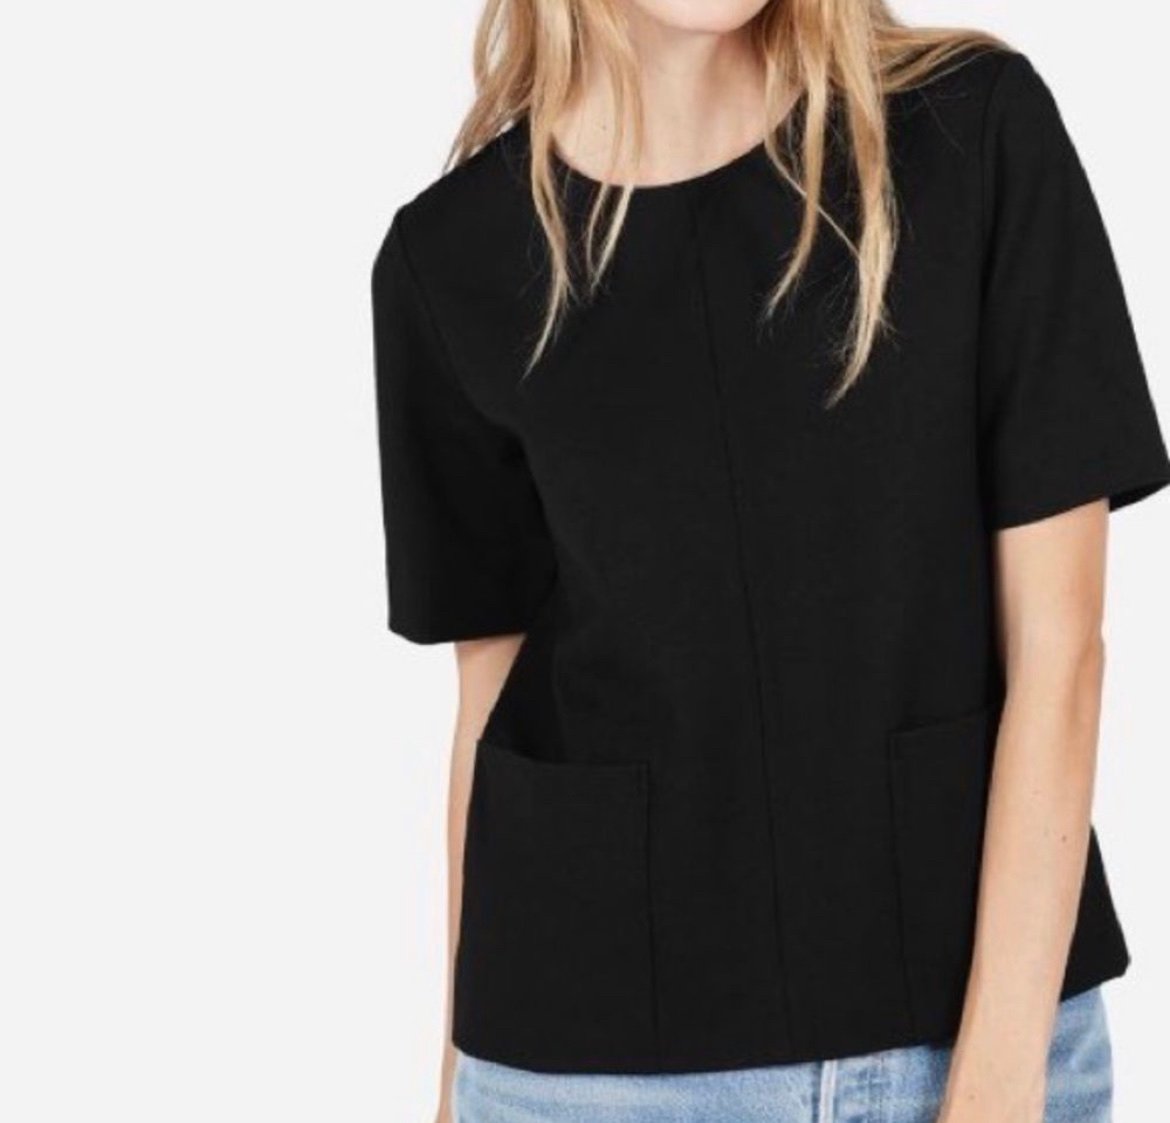 Discounted Everlane The Ponte Short Sleeve Top gtLaixAAM just for you